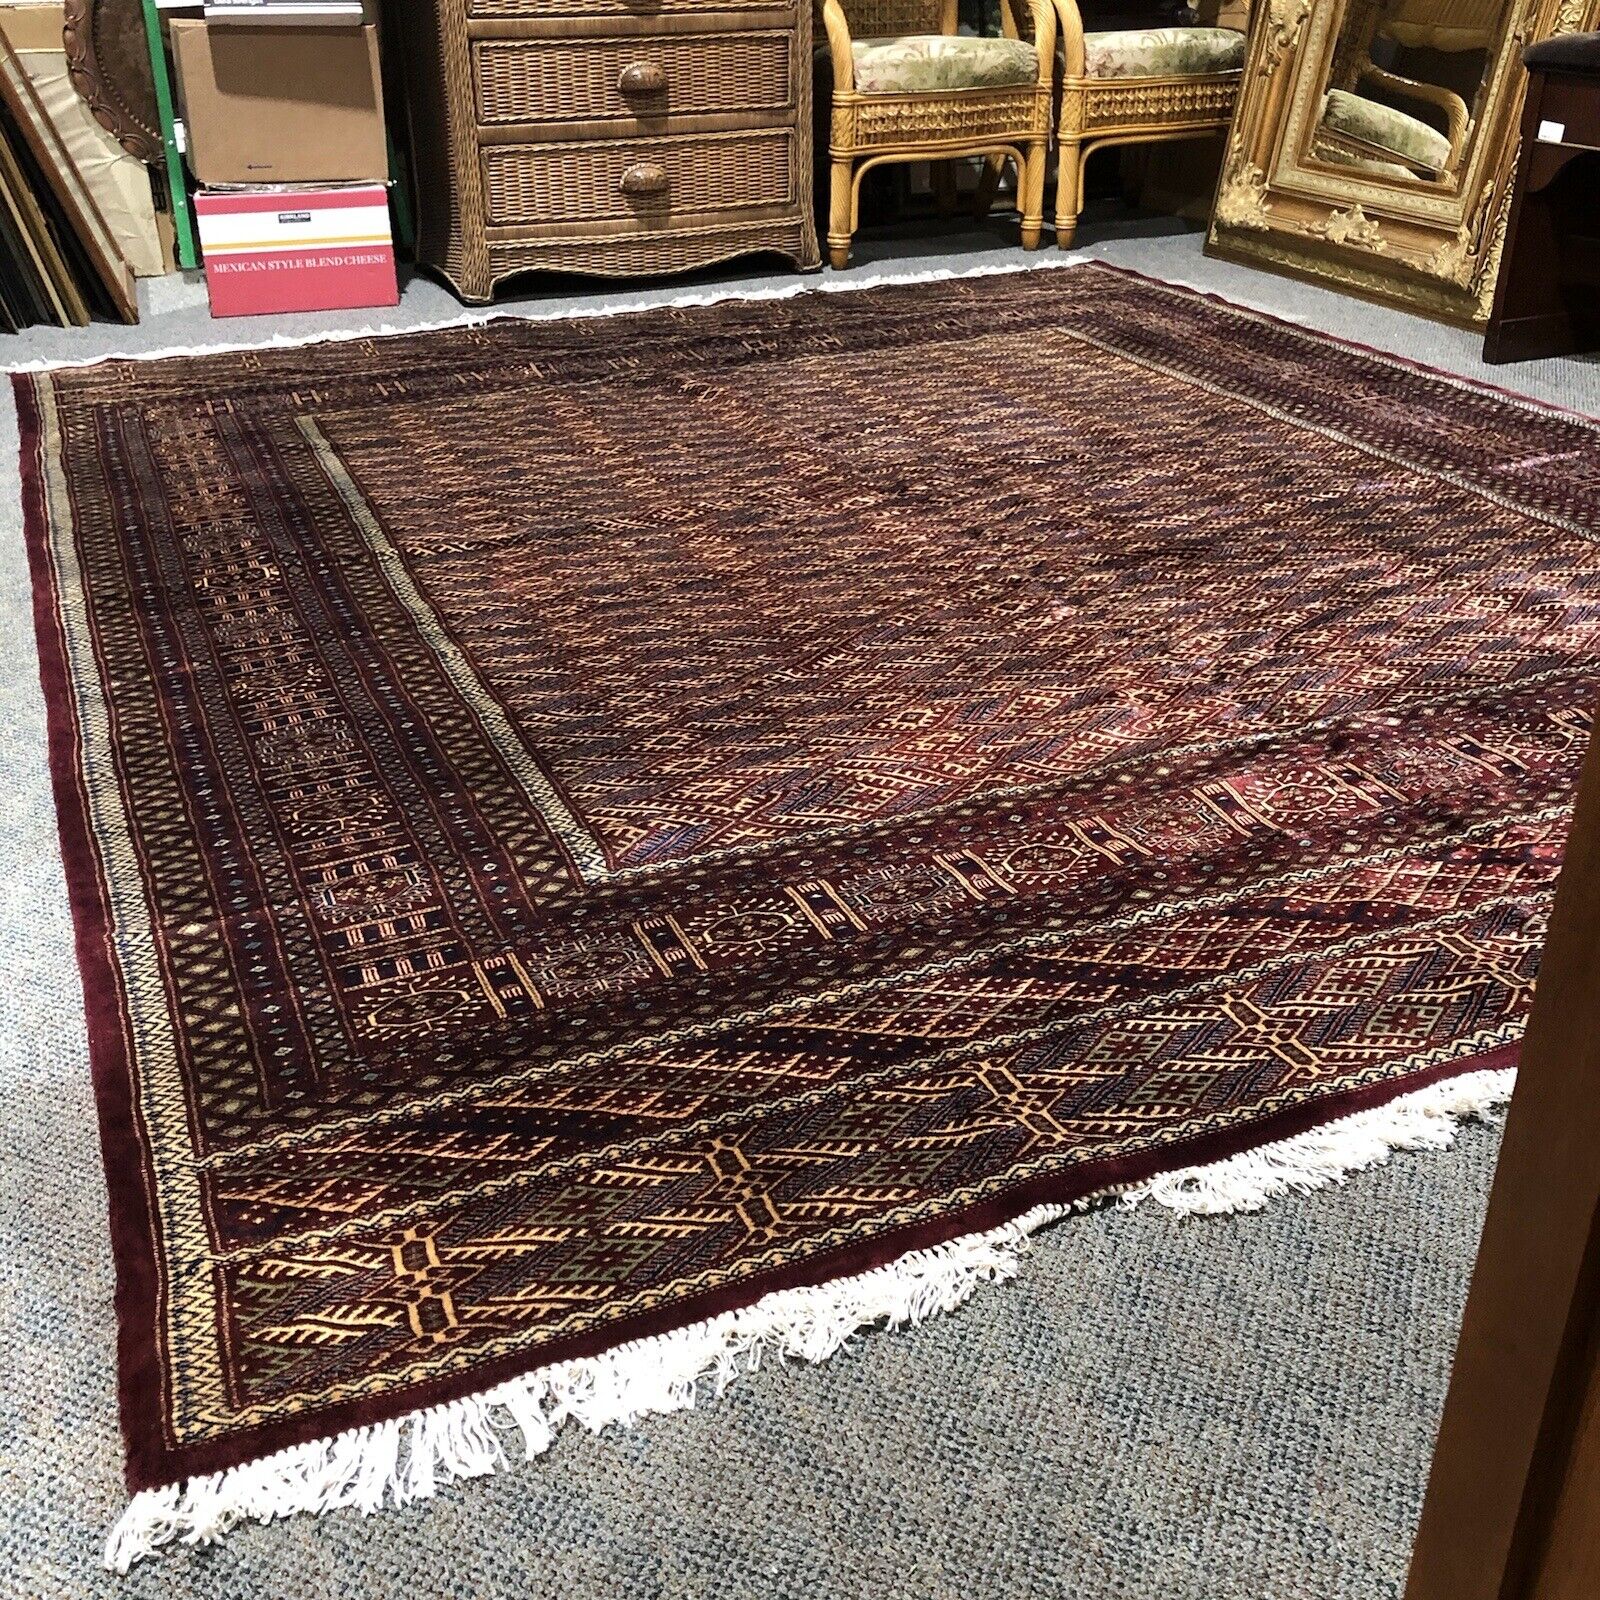 9 FT. X 8 1 / 2 FT. HAND KNOTTED ORIENTAL WOOL RUG PAKISTAN TIGHT WEAVE EXCELLE 